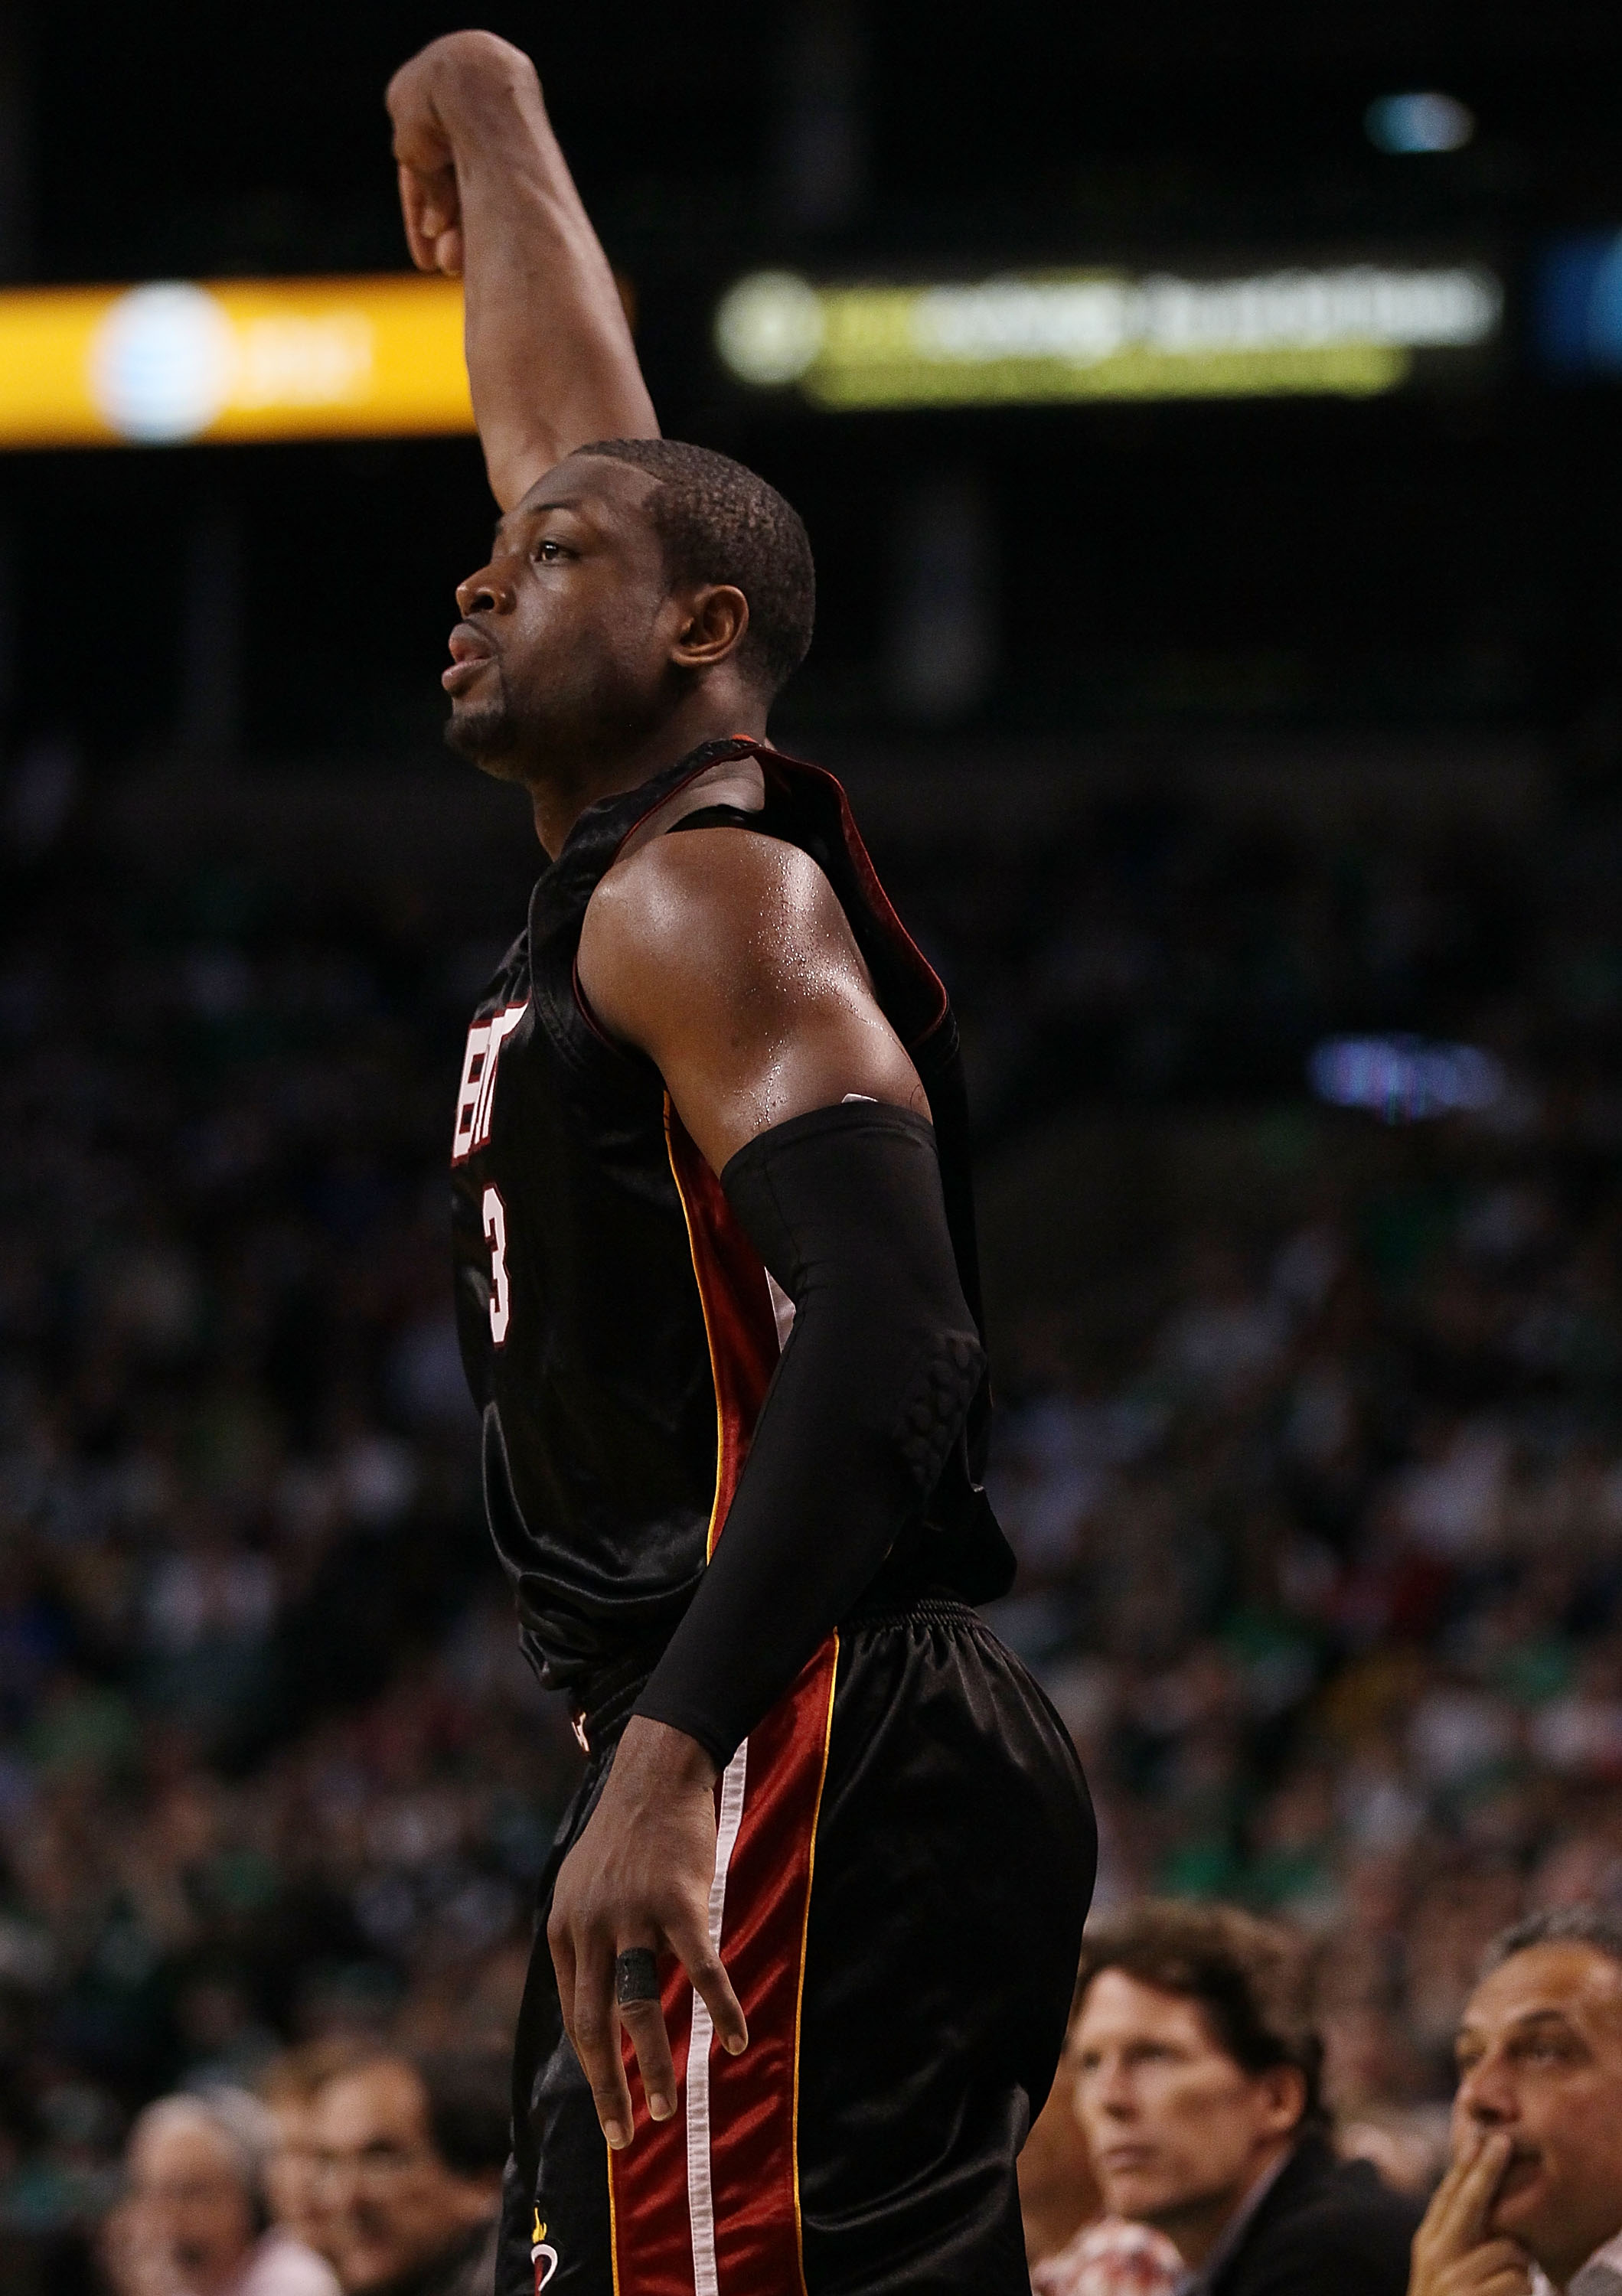 BOSTON - APRIL 27:  Dwyane Wade #3 of the Miami Heat watches his three point shot in the second half against the Boston Celtics during Game Five of the Eastern Conference Quarterfinals of the 2010 NBA playoffs at the TD Garden on April 27, 2010 in Boston,